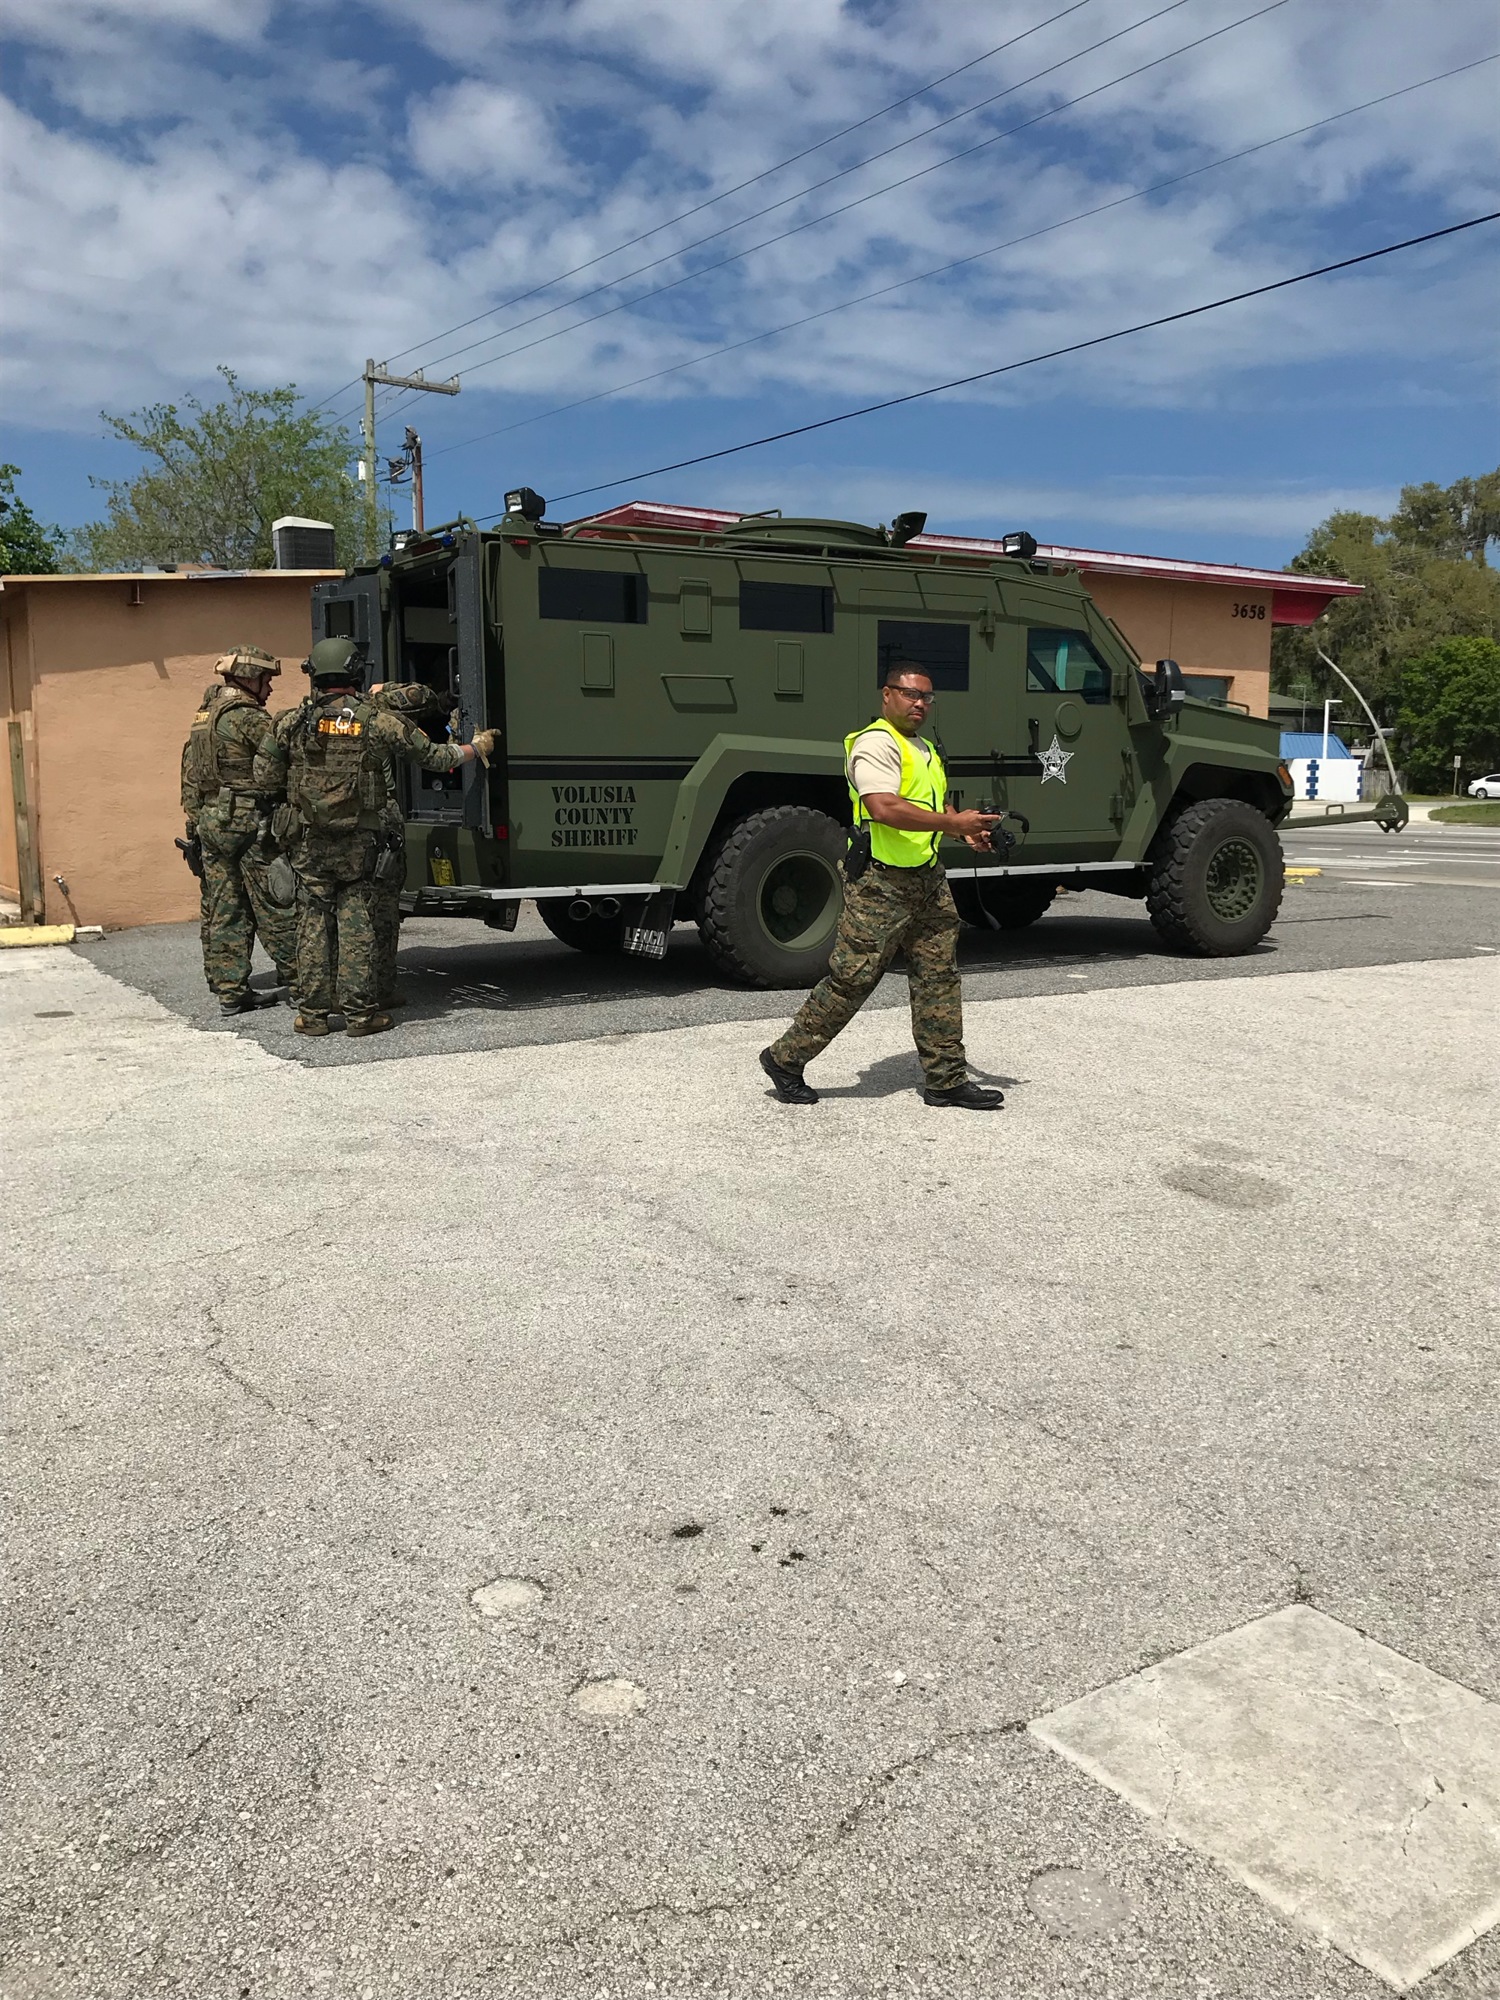 Lieutenant Israel and SWAT with Volusia County Sheriff's Department. Photo by Tanya Russo